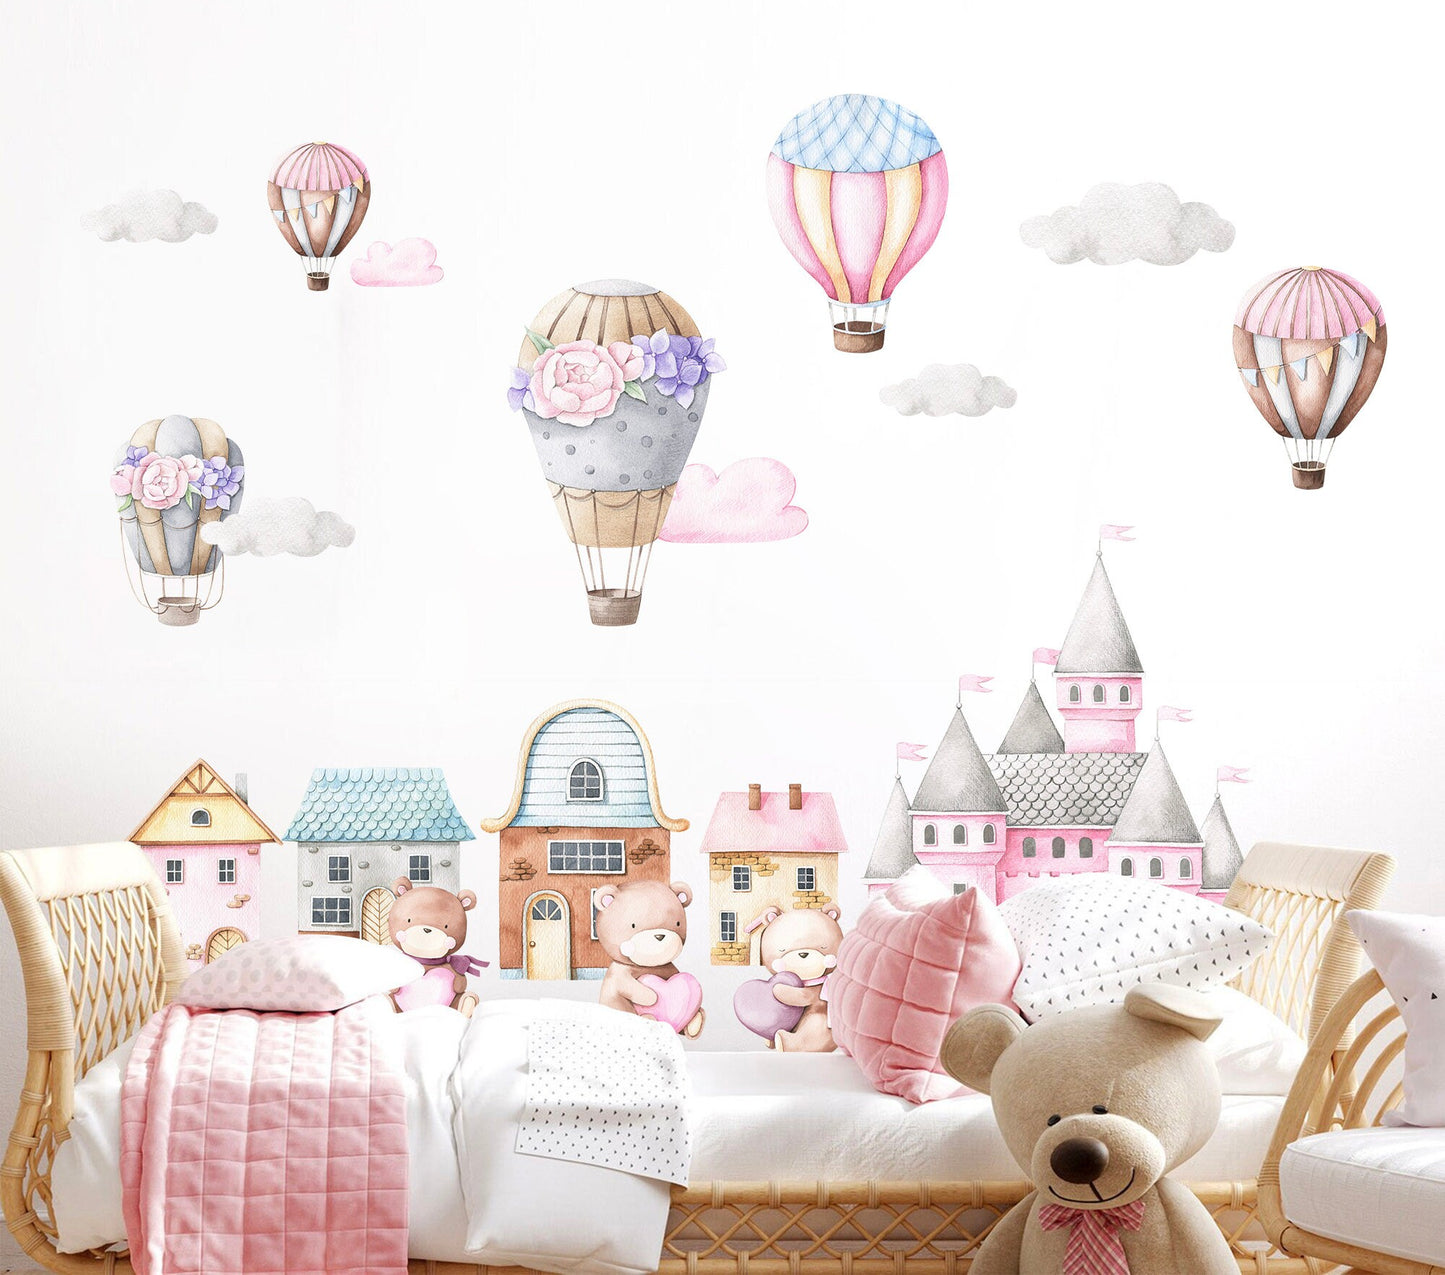 Watercolor Baby Bear in Castle with Pink Hot Air Floral Balloon Removable Wall Decal Sticker - BR099